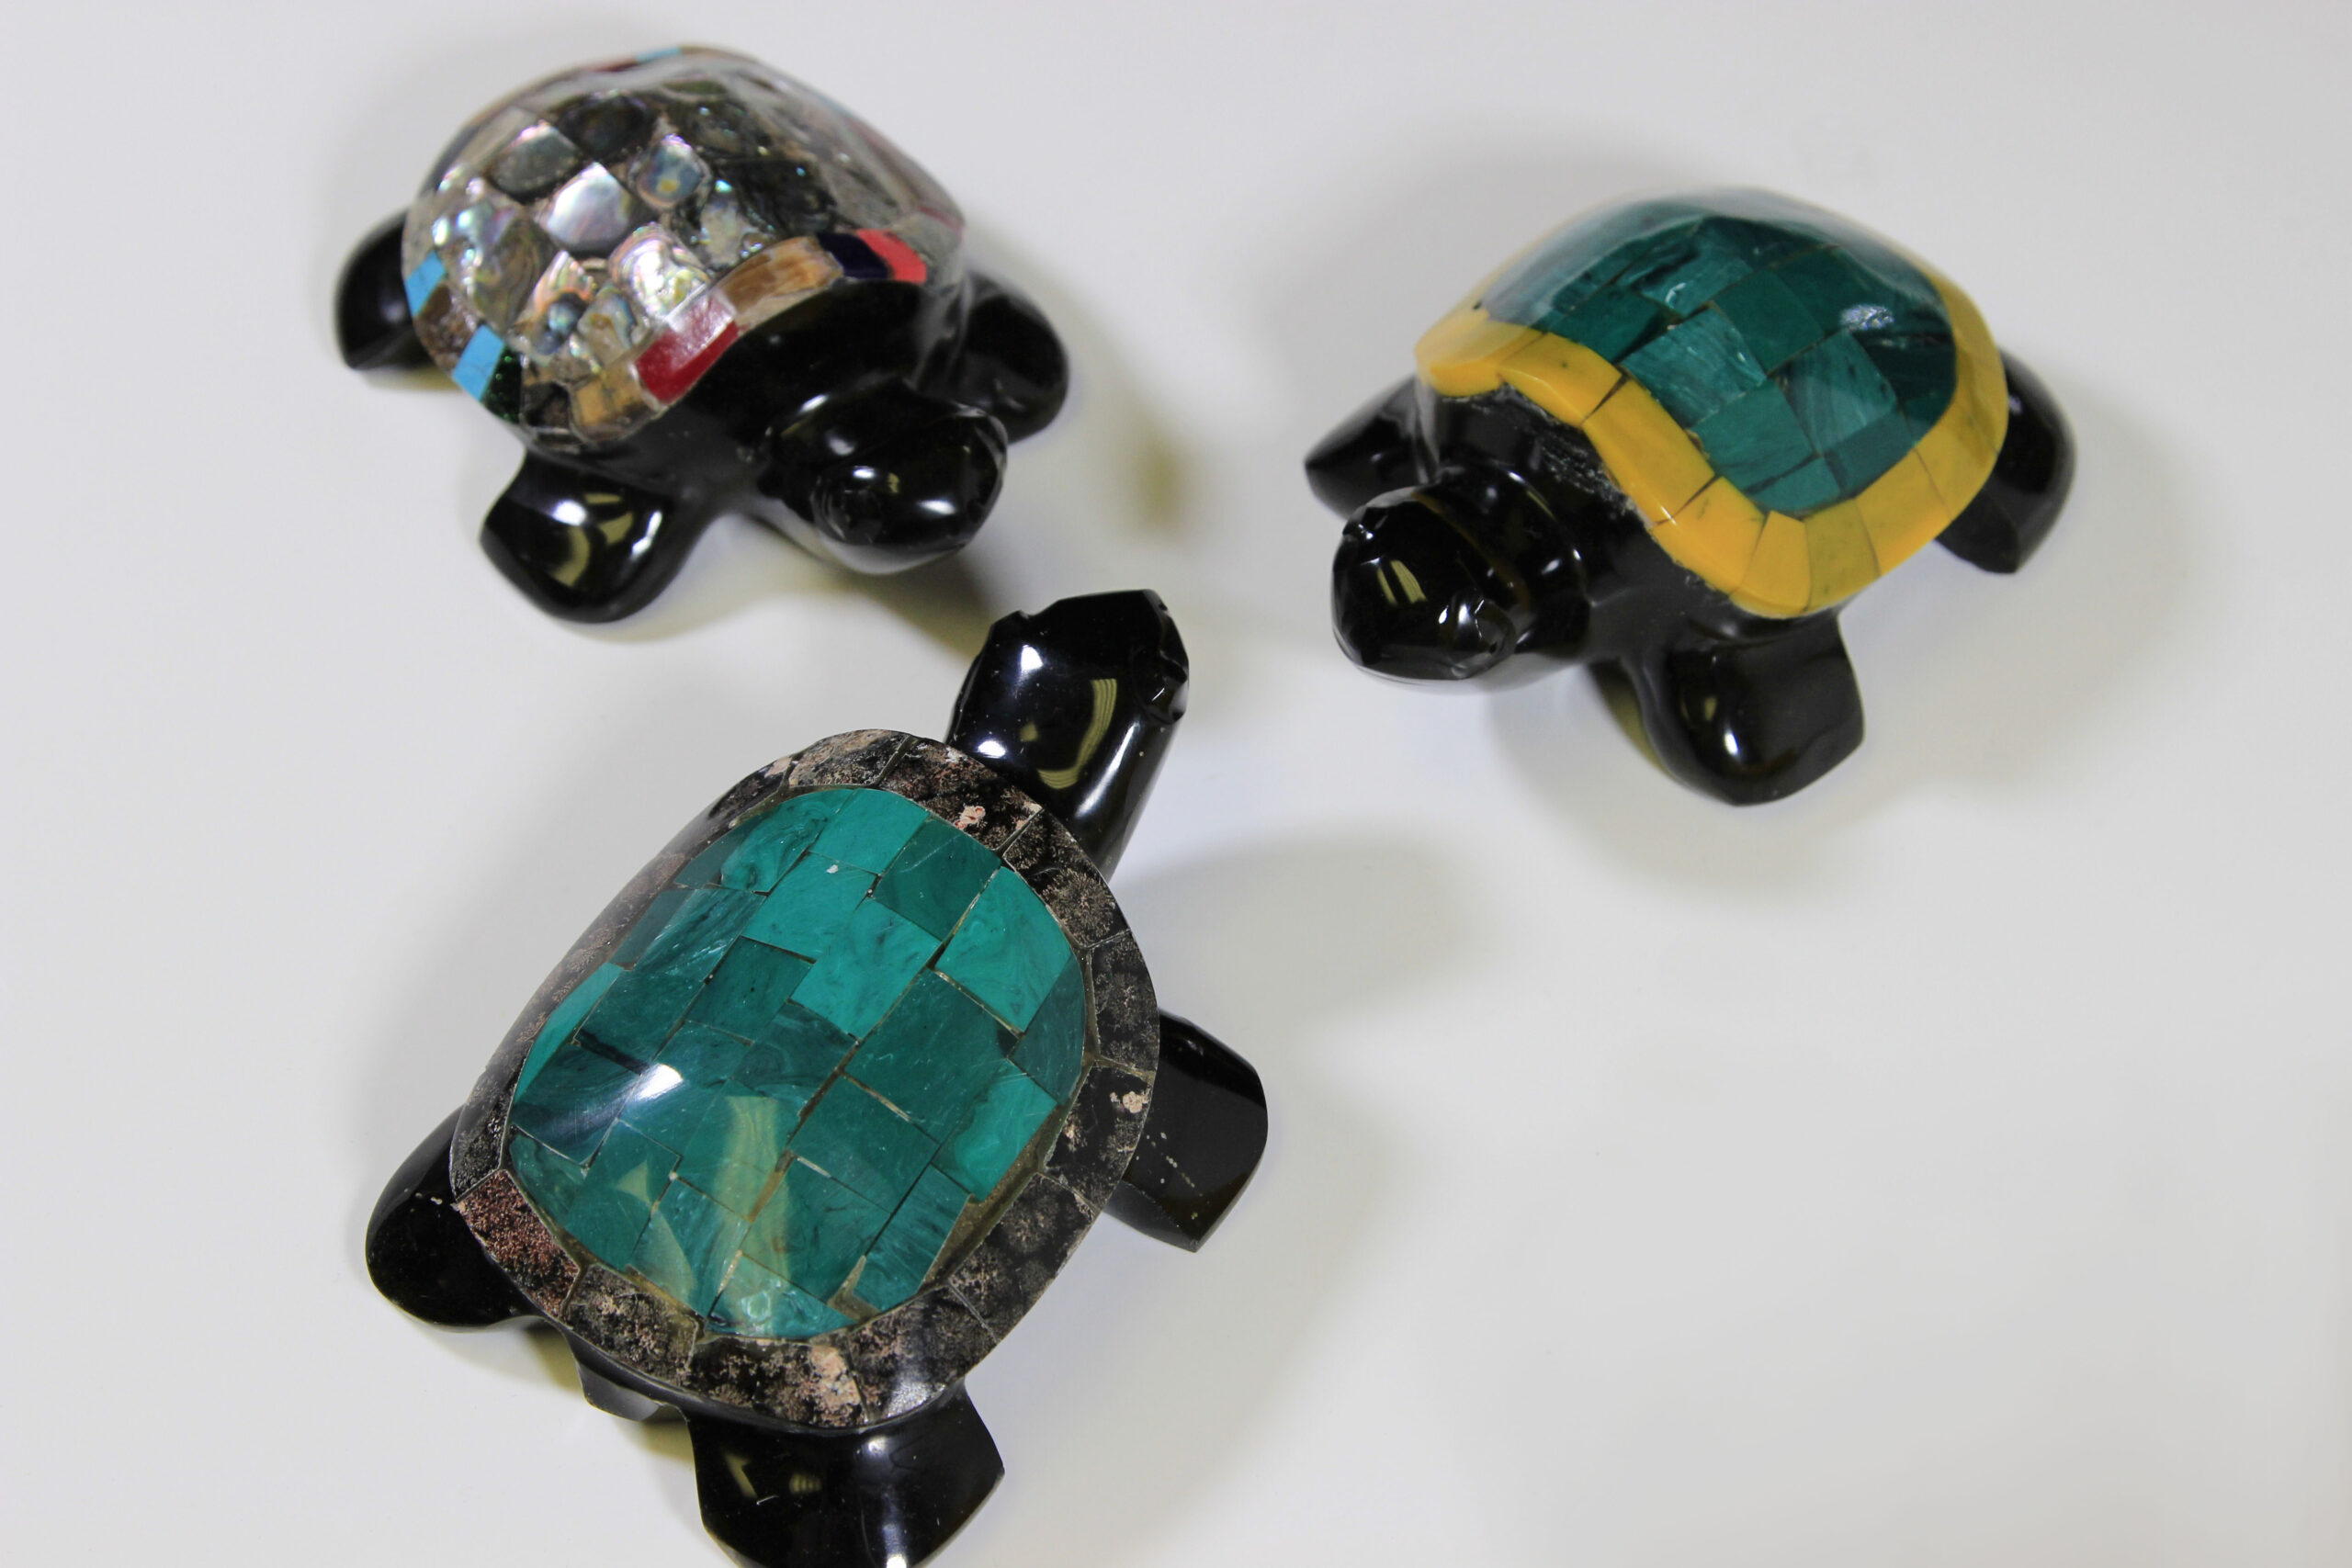 Three obsidian turtle figurines with assorted colored shells